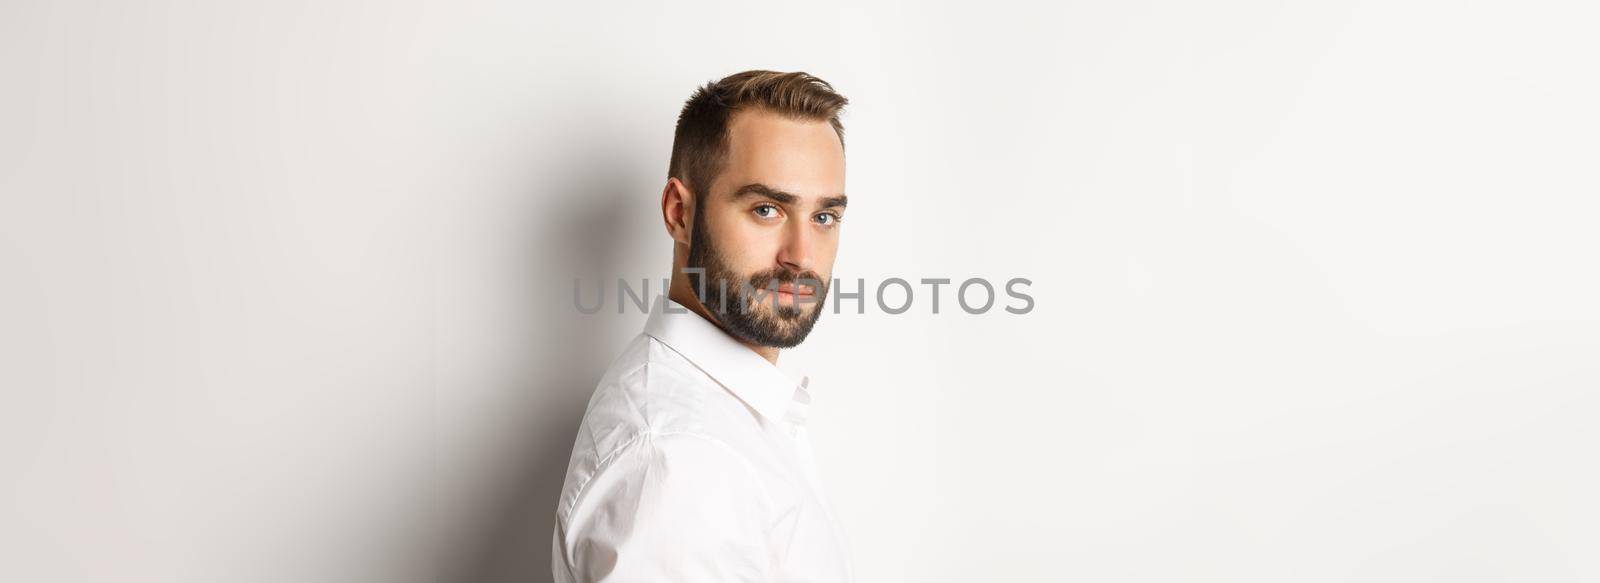 Close-up of professional business man turn face at camera, looking confident, standing against white background.